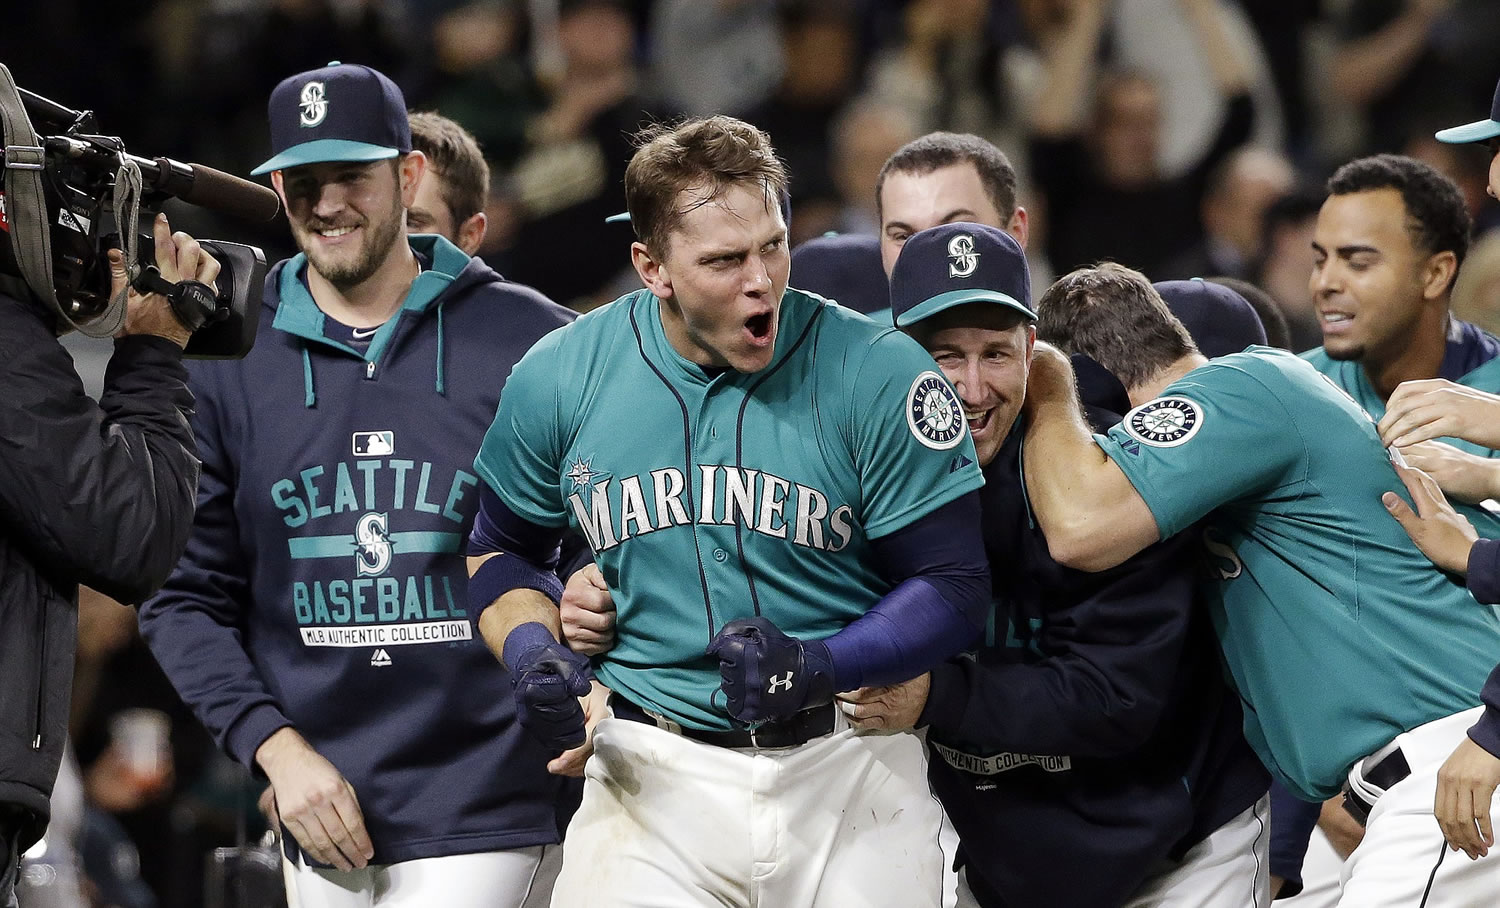 Seattle Mariners' Logan Morrison, center, emerges from a crowd of teammates who crowded around him at home after his walk-off home run against the Oakland Athletics in the 11th inning Friday, May 8, 2015, in Seattle. The Mariners won 4-3.